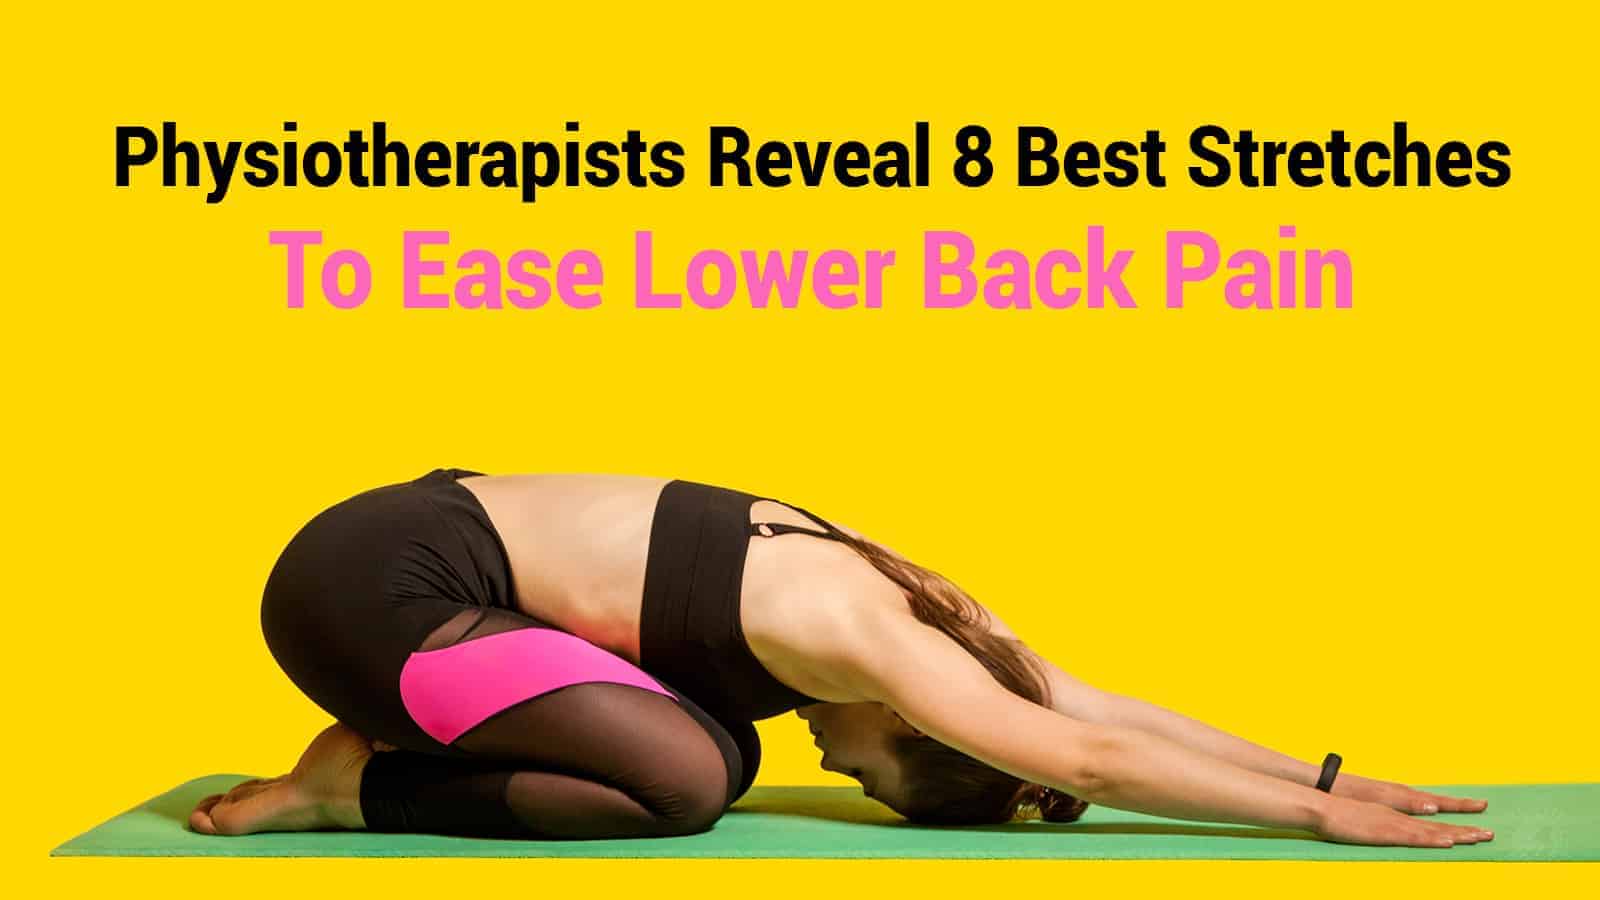 Physiotherapists Reveal 8 Best Stretches To Ease Lower Back Pain